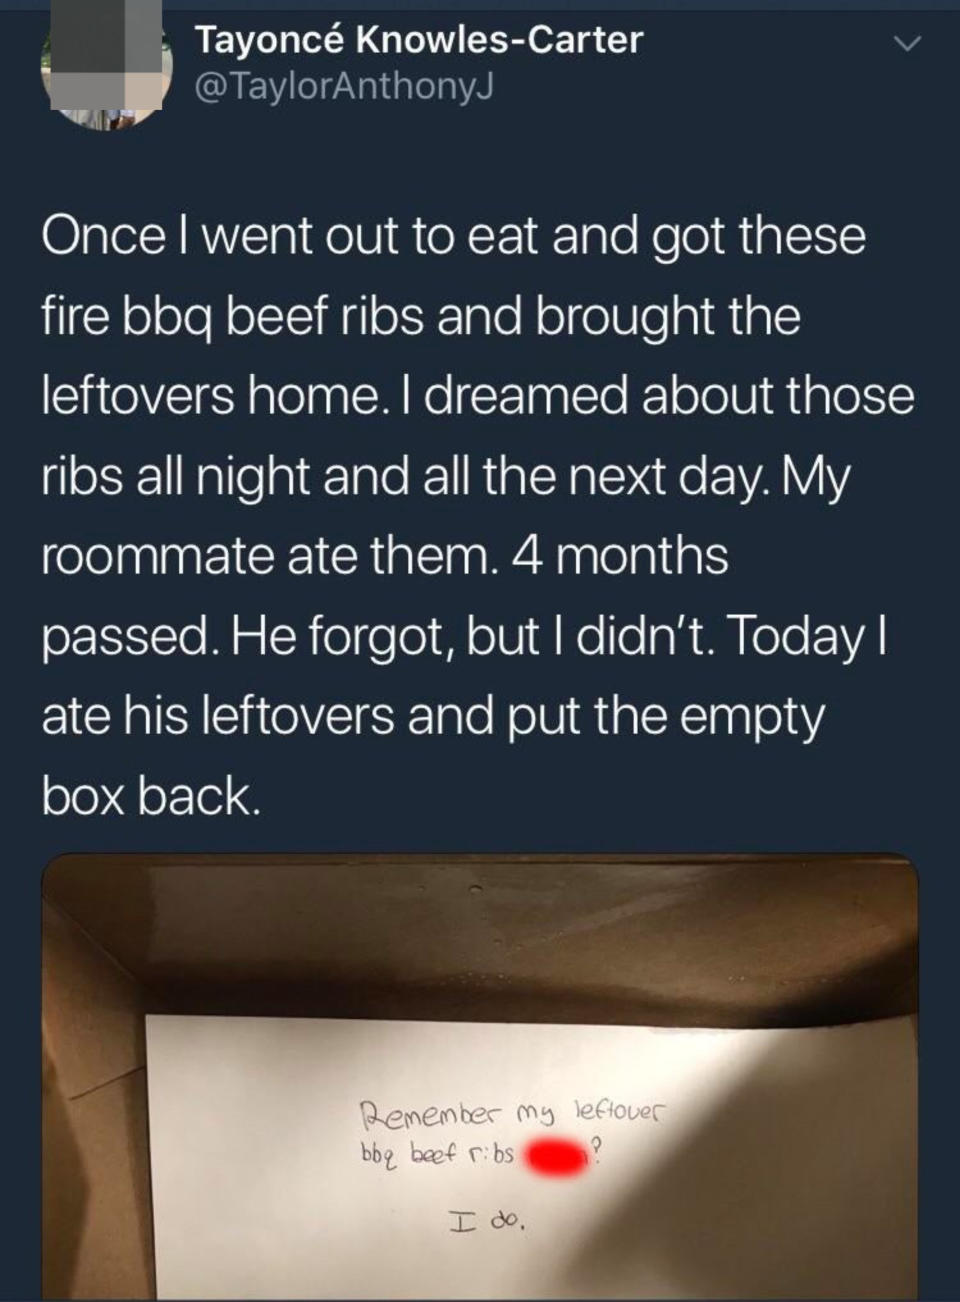 A tweet of someone eating their roommate's leftovers because they ate theirs